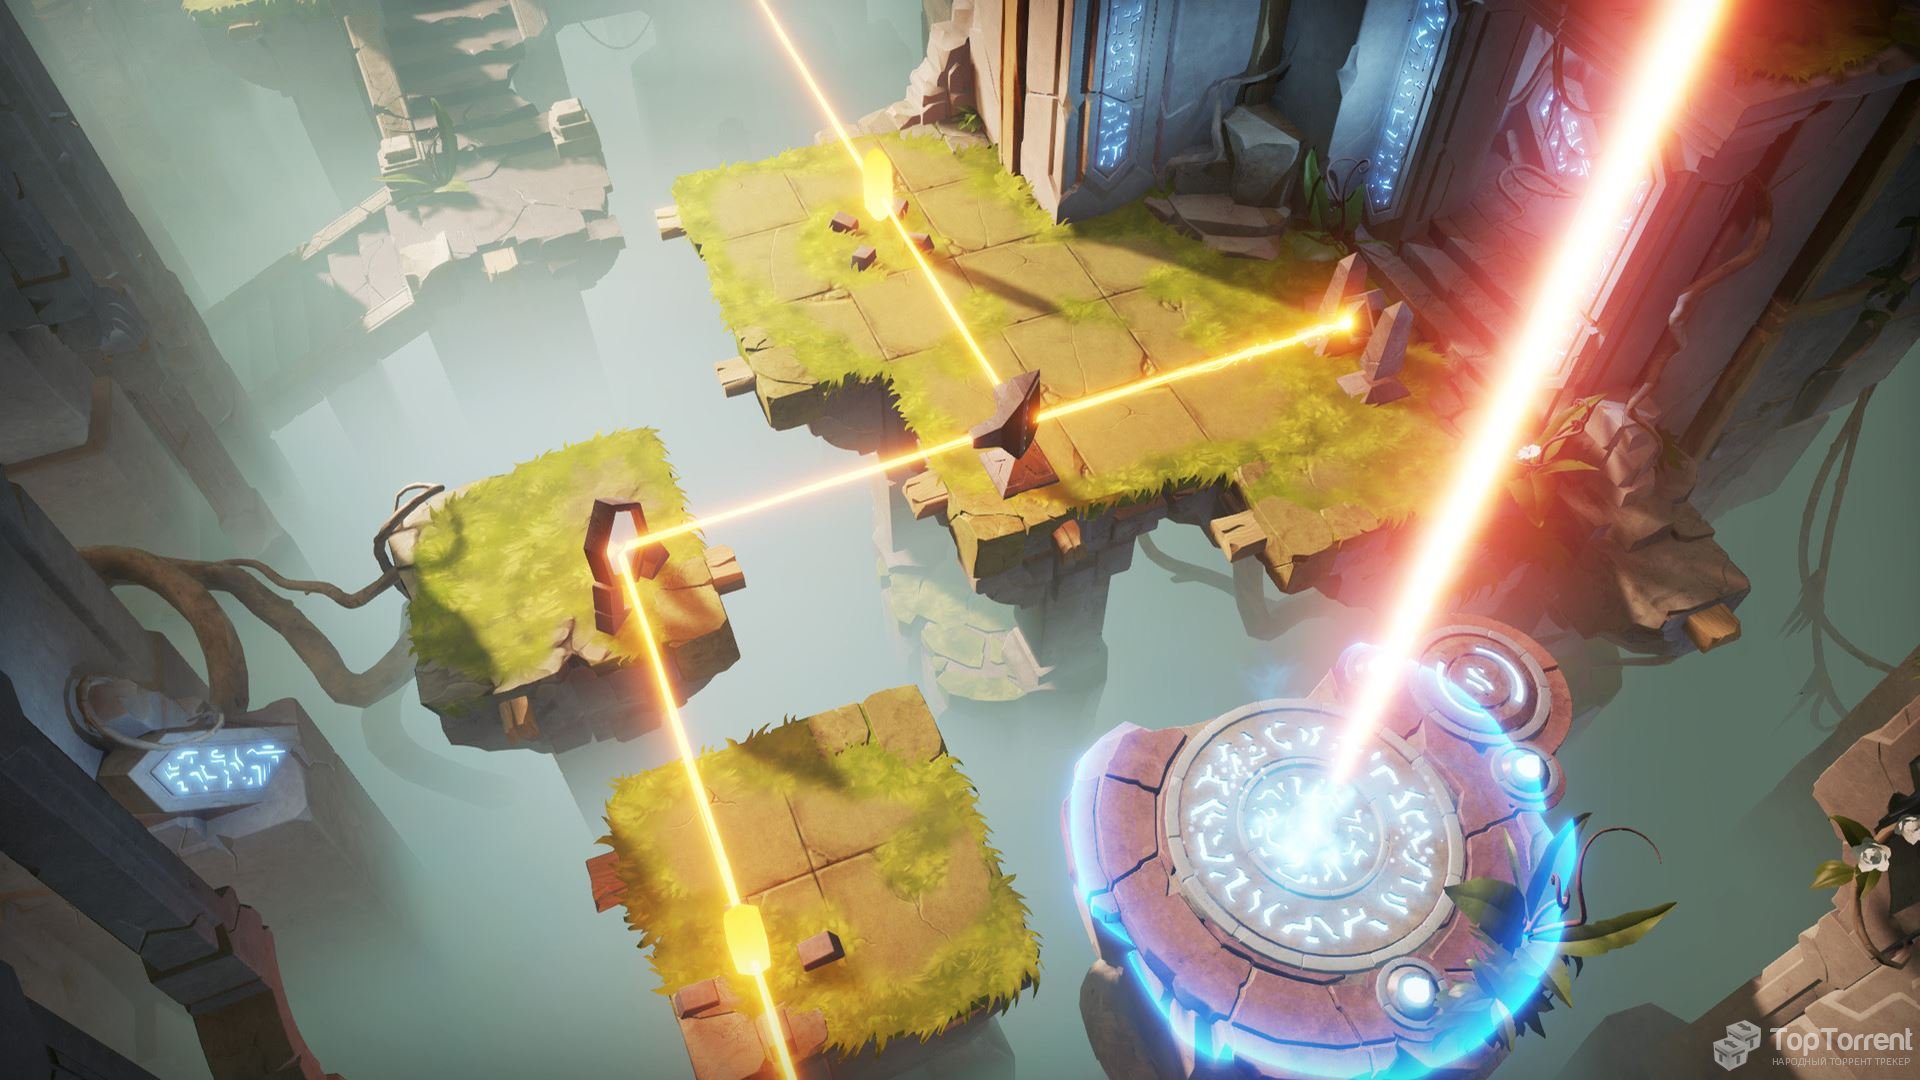 The path of star манга. Archaica the Path of Light. Path of Light game. Игра свет. The Path игра.